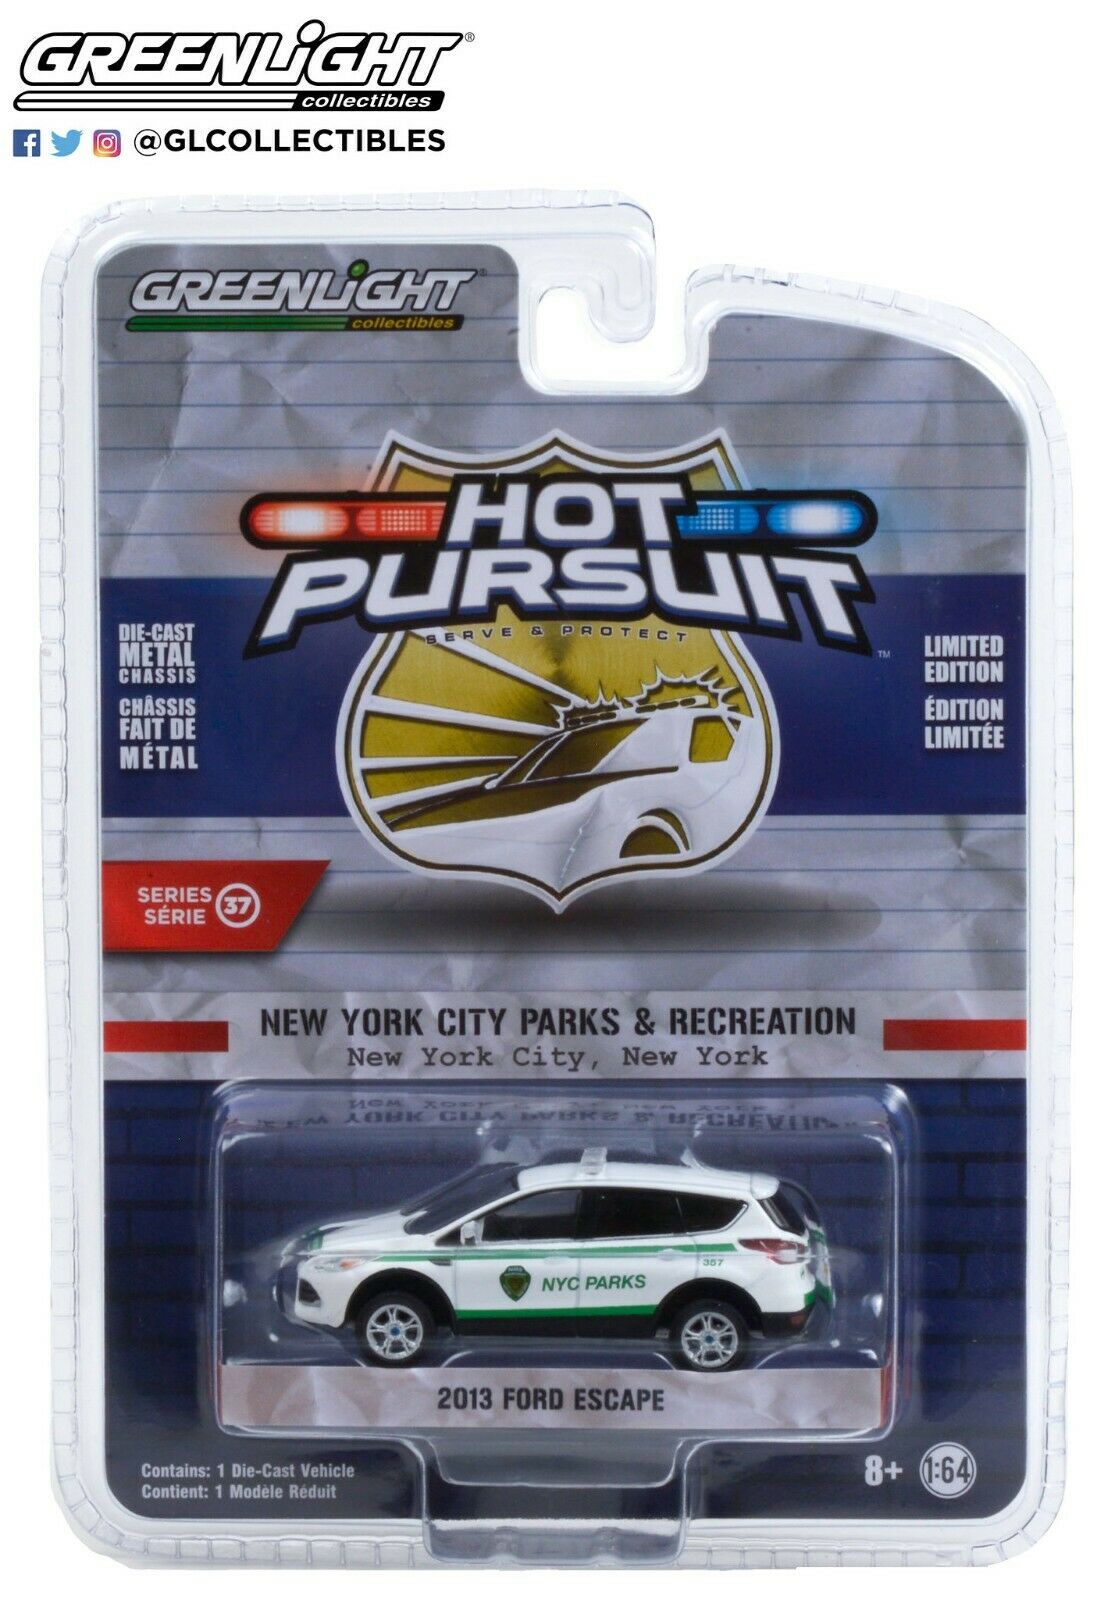 2013 FORD ESCAPE WHITE "NYC DEPT OF PARKS & RECREATION" 1/64 GREENLIGHT 42950 D